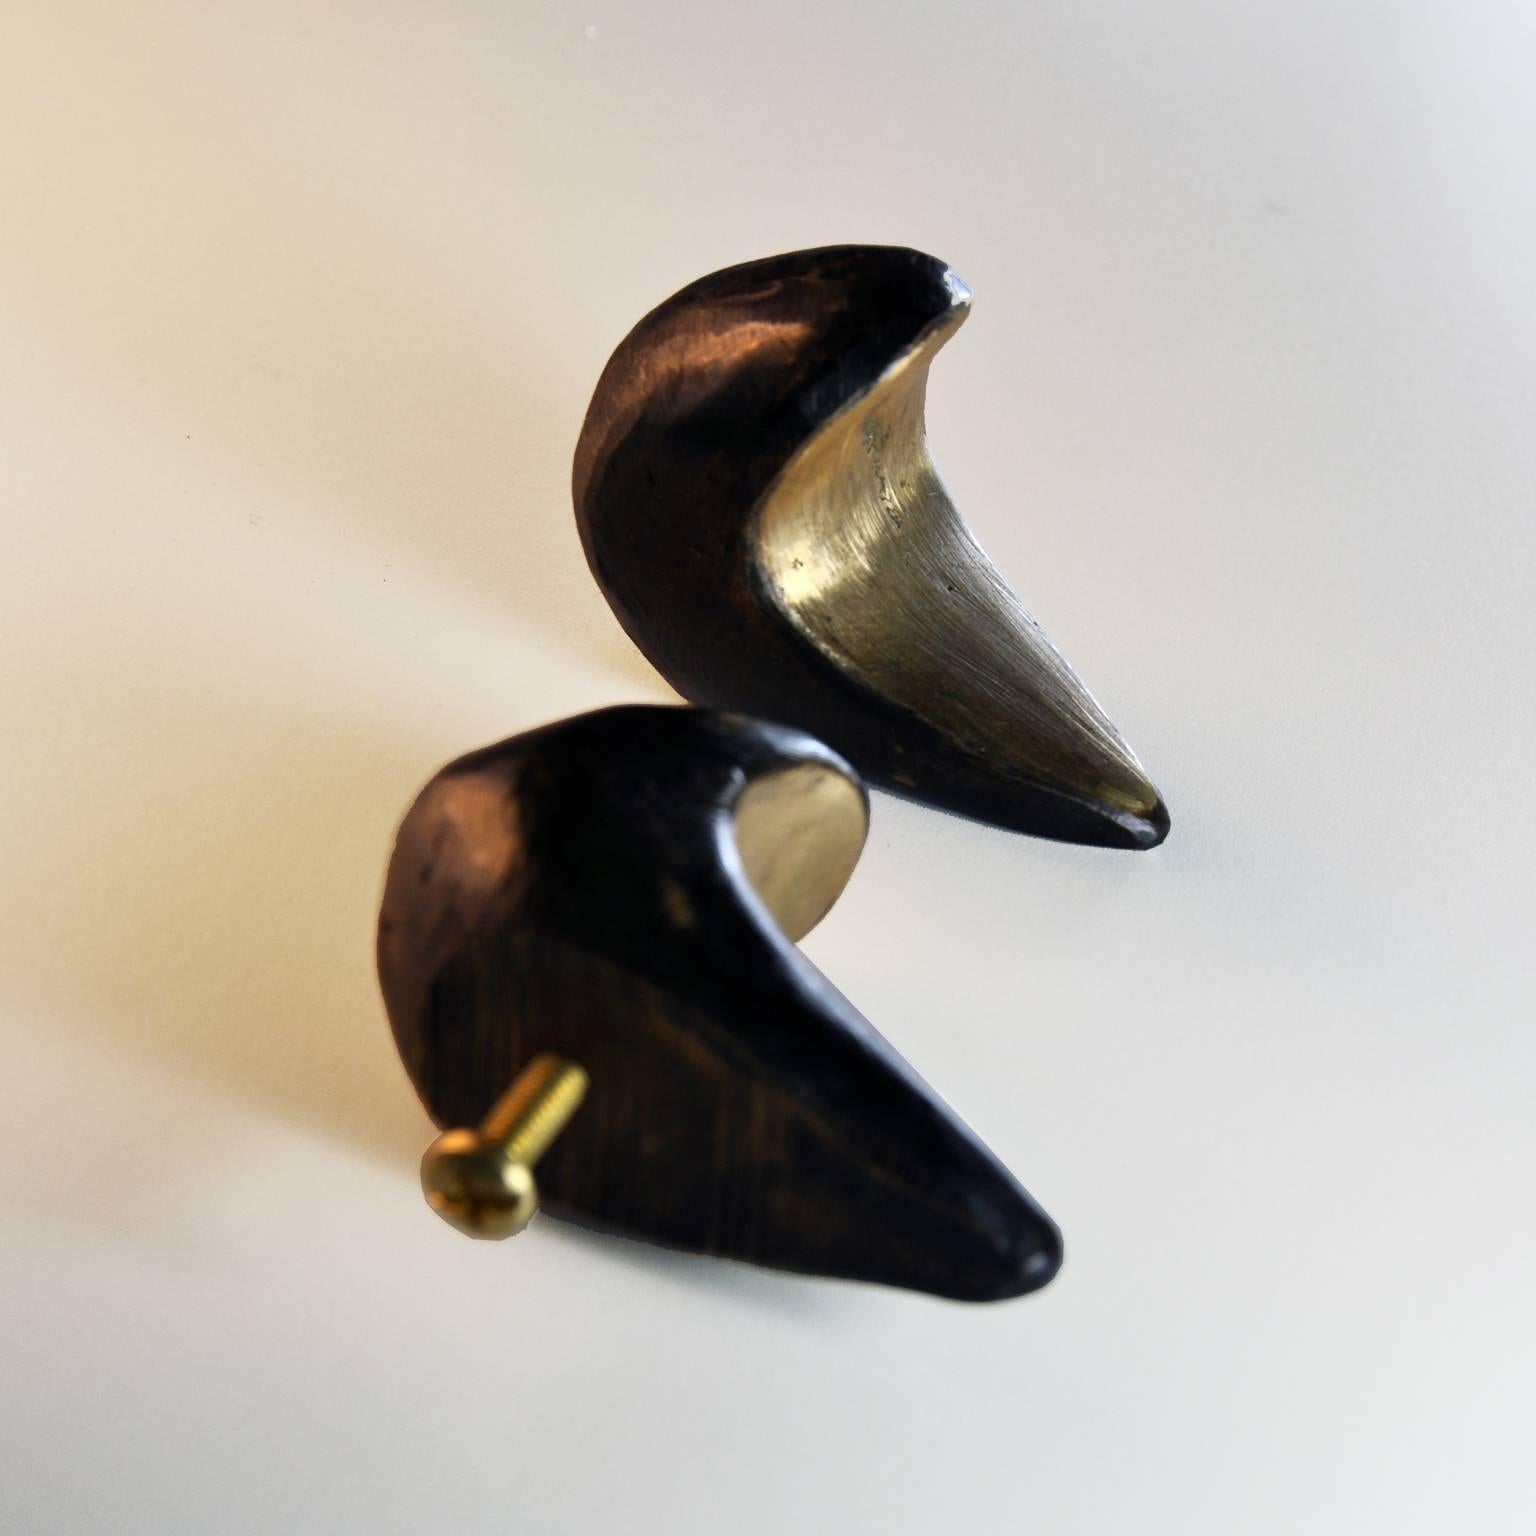 The sculptural Dickon drawer pull is cast from solid brass, finished by hand, blackened and lacquered in Portland, Oregon. Each is slightly different from the next.

Thread: 8-32.